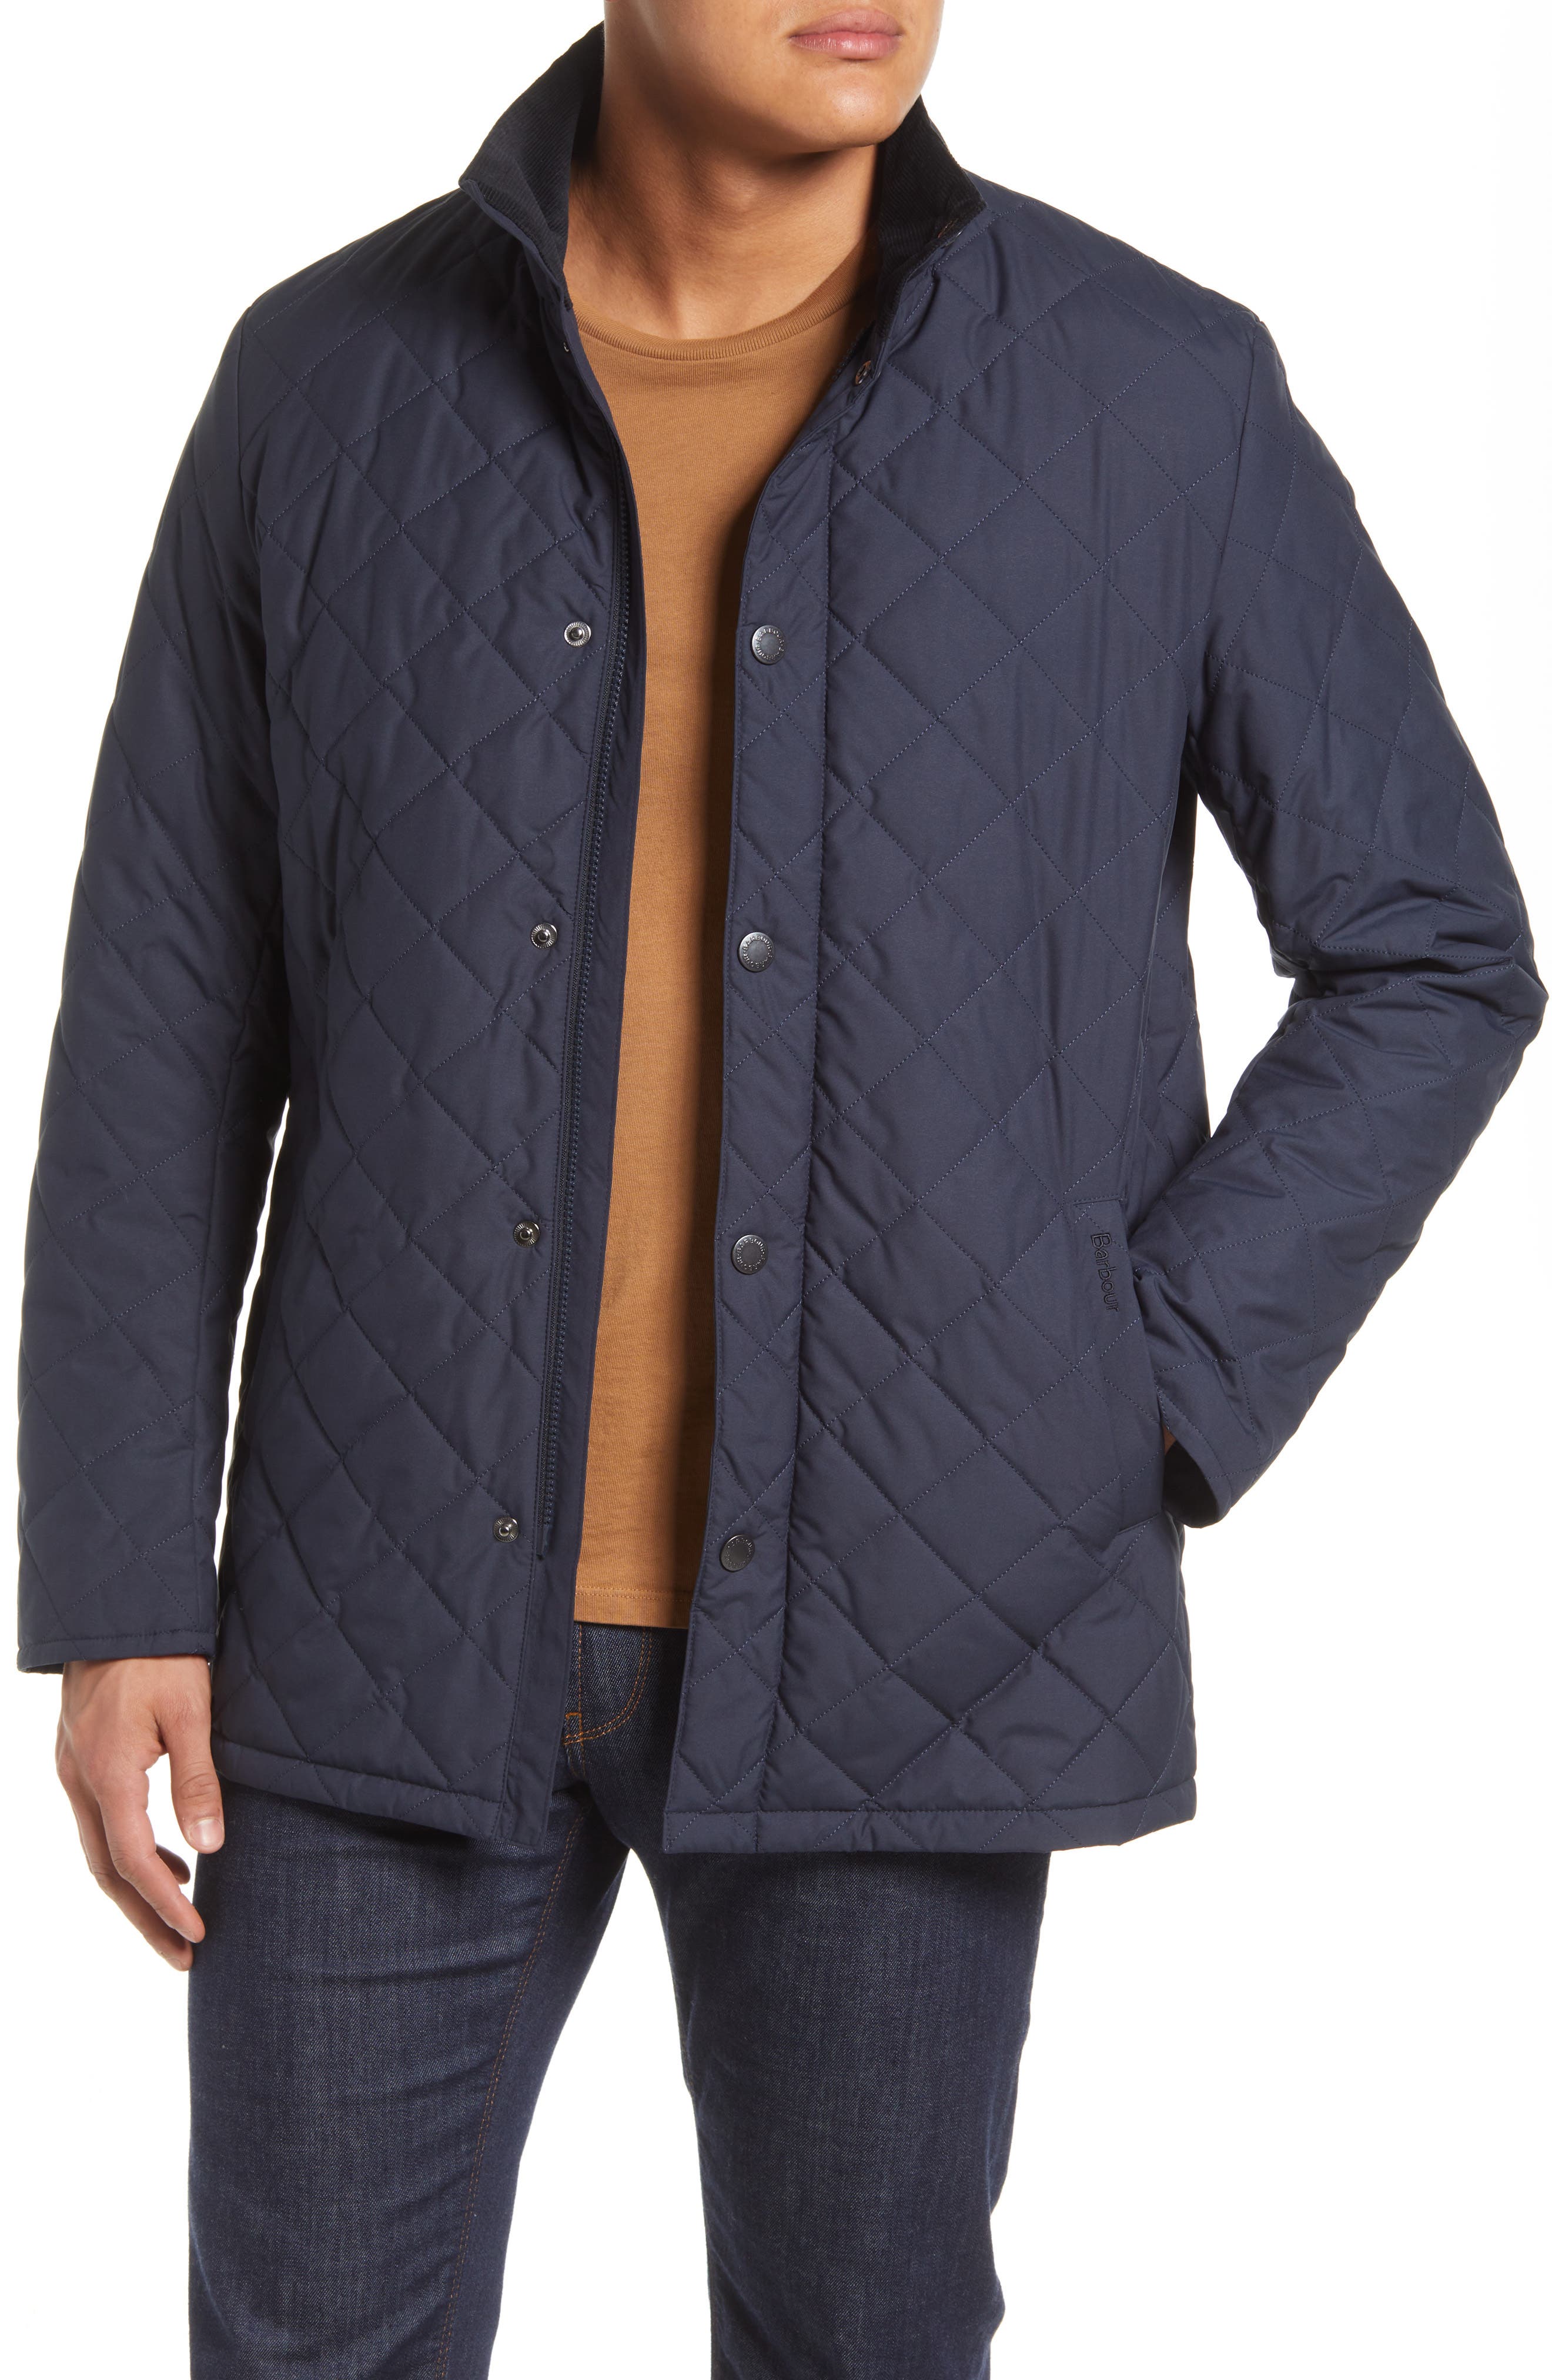 Griffin Goose Down Jacket in Bright Blue Blue Mens Clothing Jackets Casual jackets for Men 